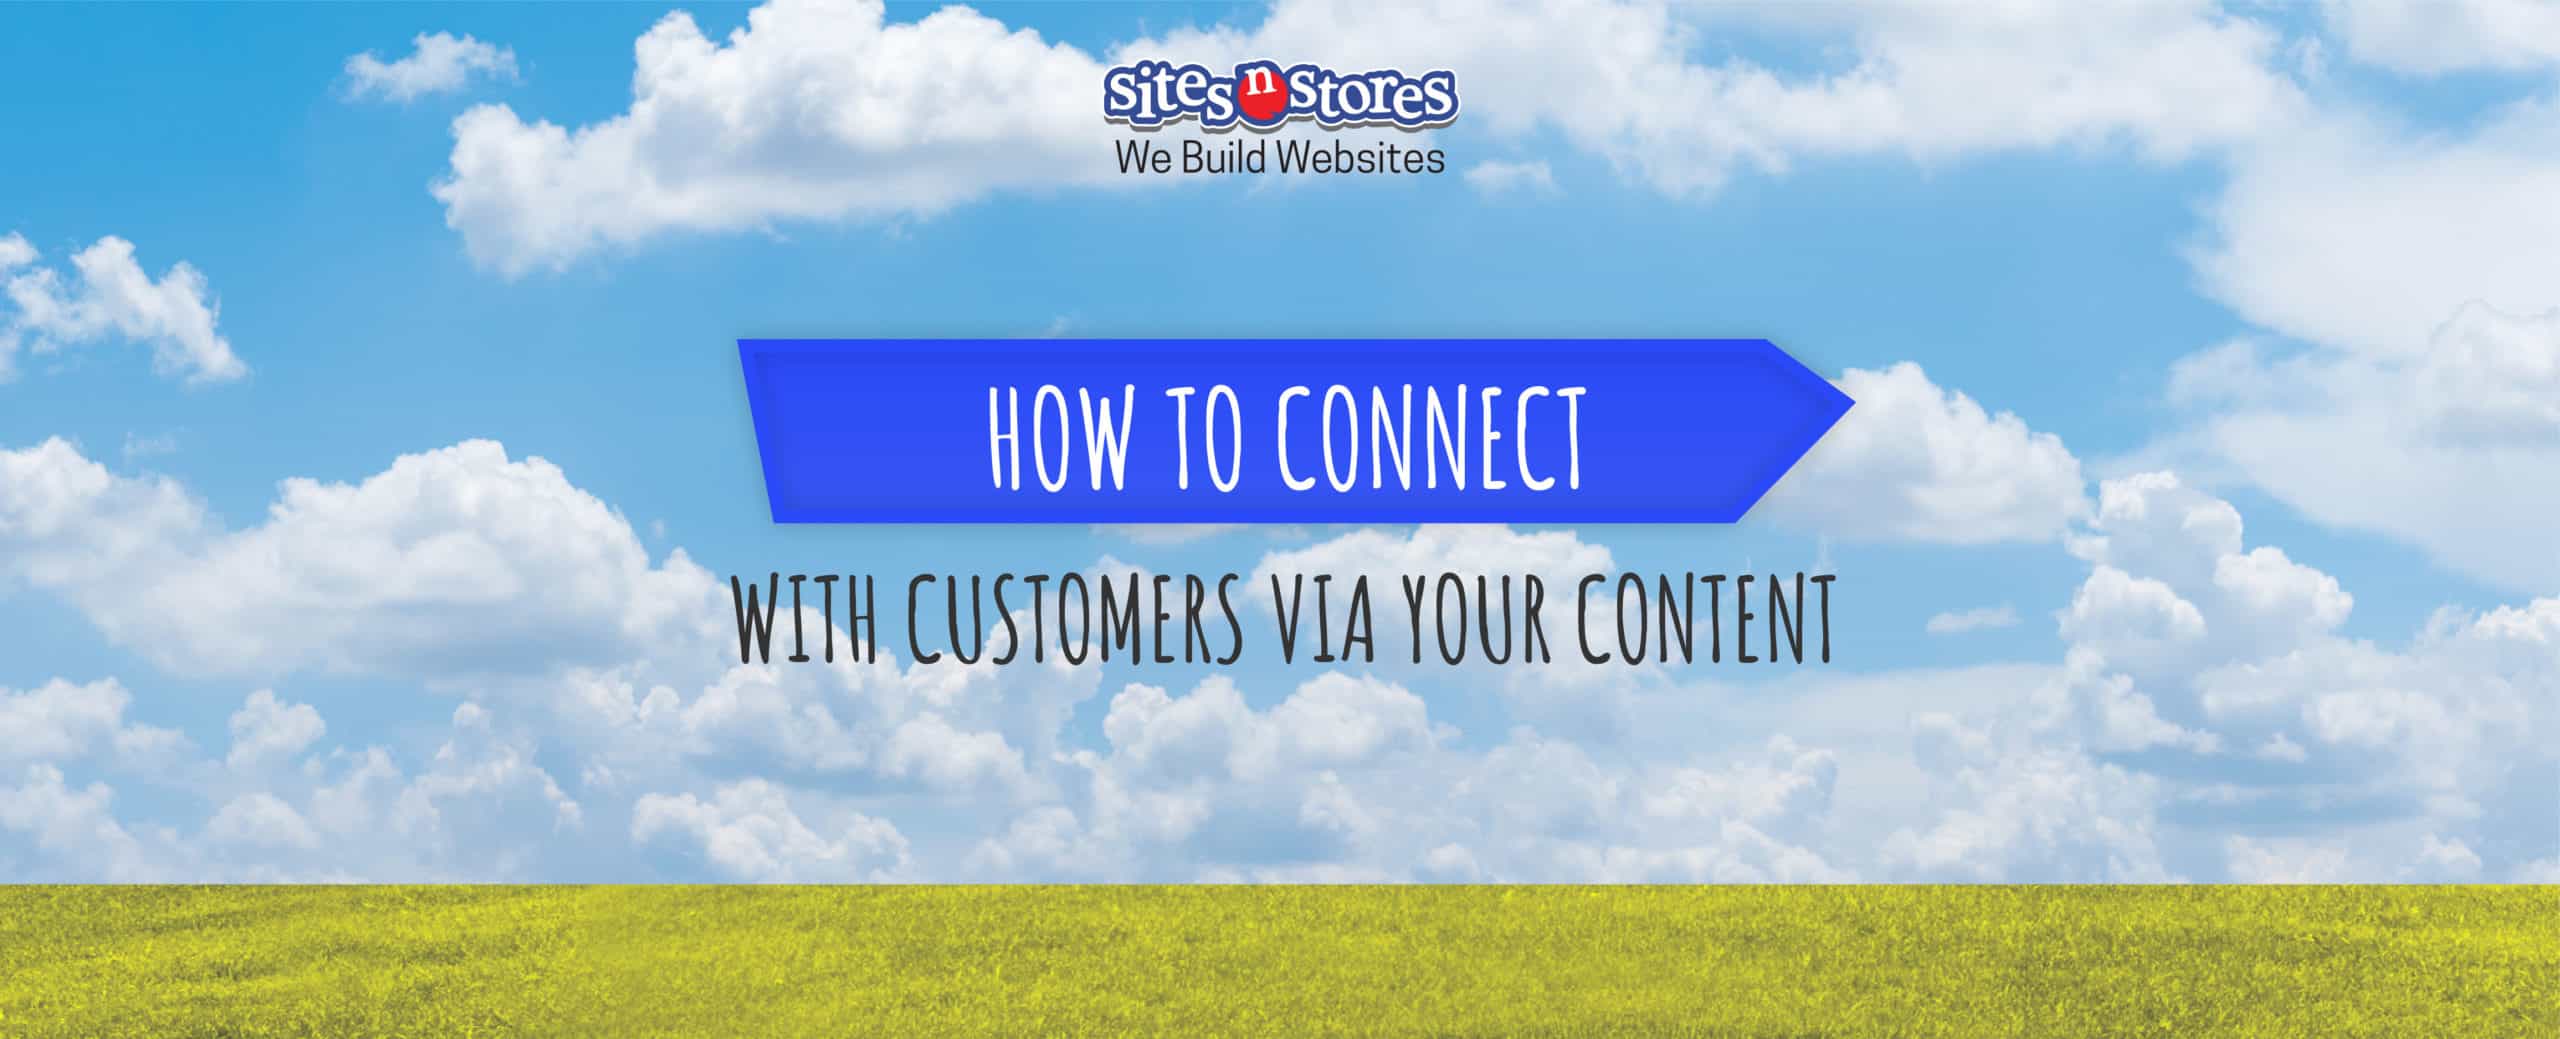 How to Connect With Customers Via Your Content